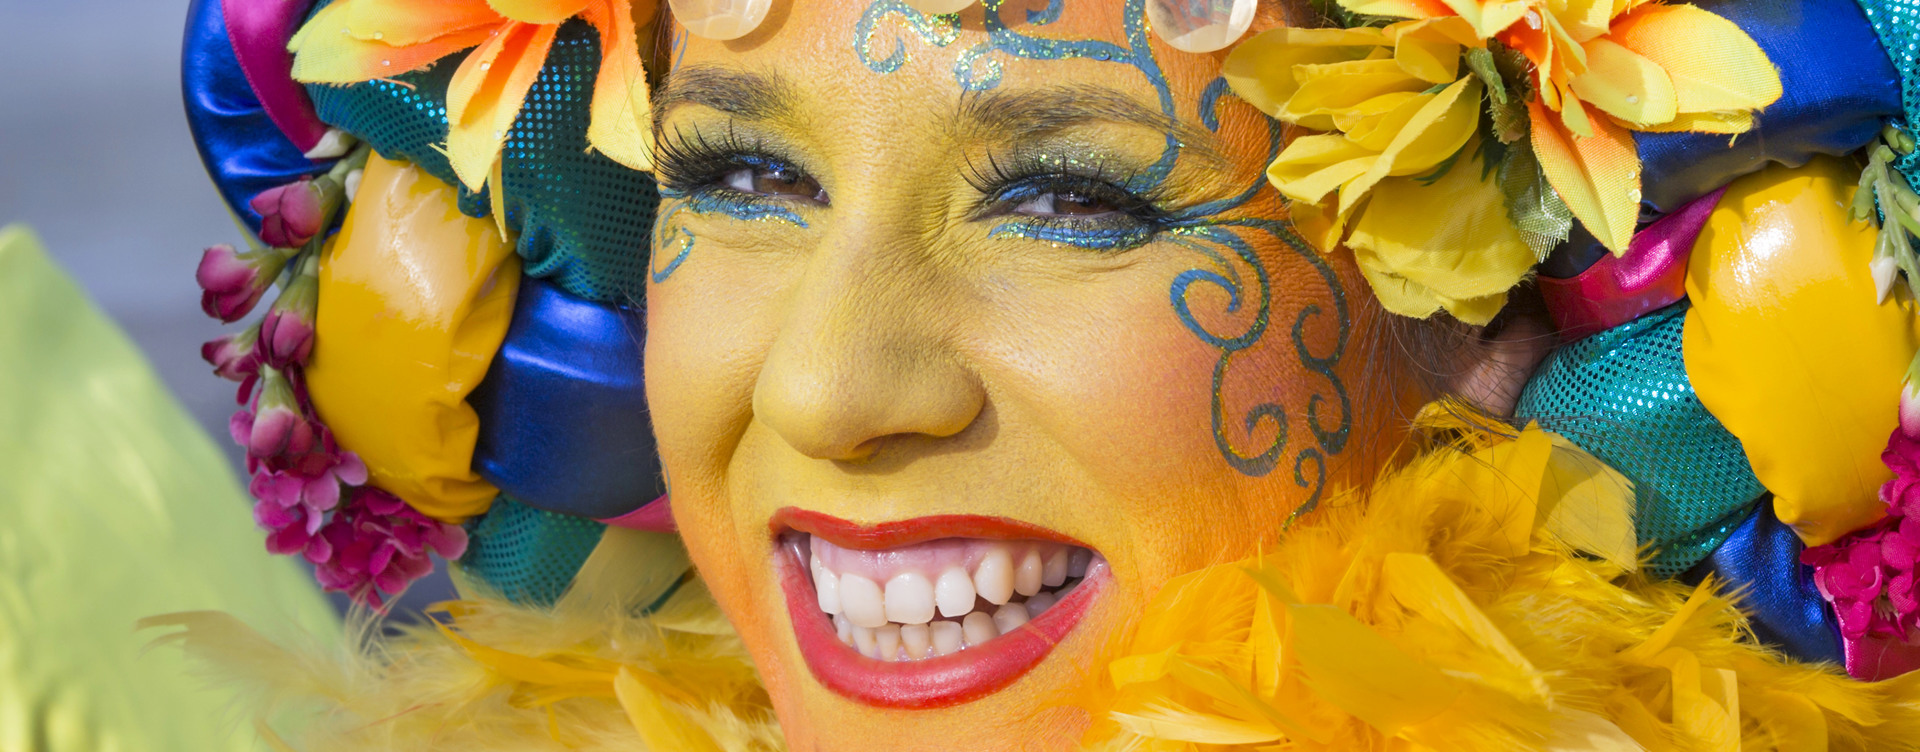 Celebrating carnival and unwinding in your hotel room in Maastricht? 
A perfect combination!